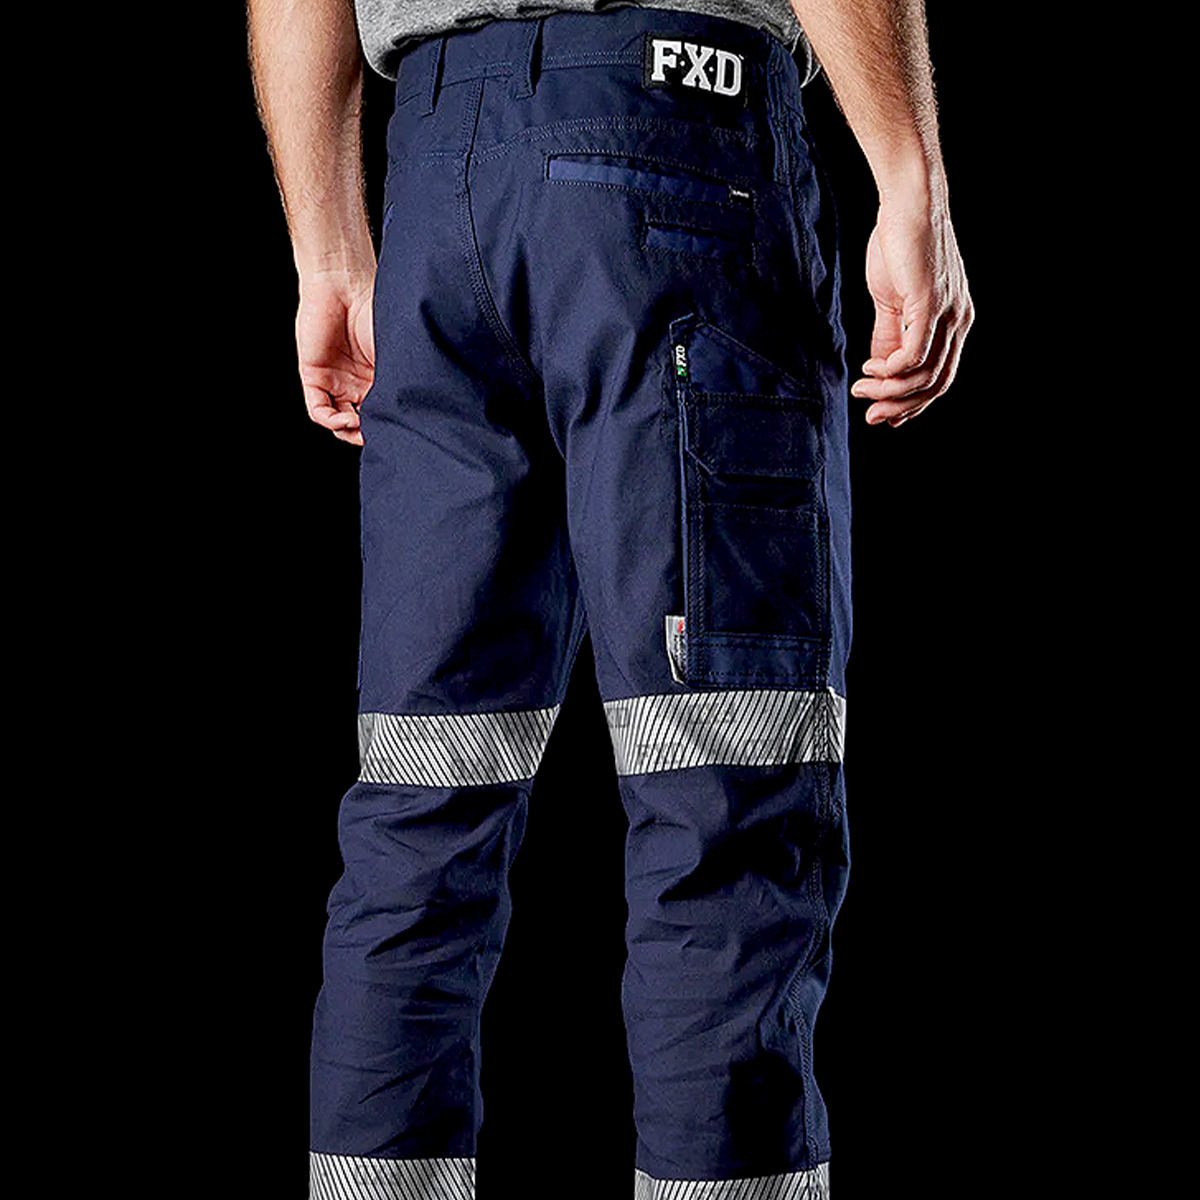 FXD Taped Stretch Cuffed Pant WP-4T - The Workers Shop